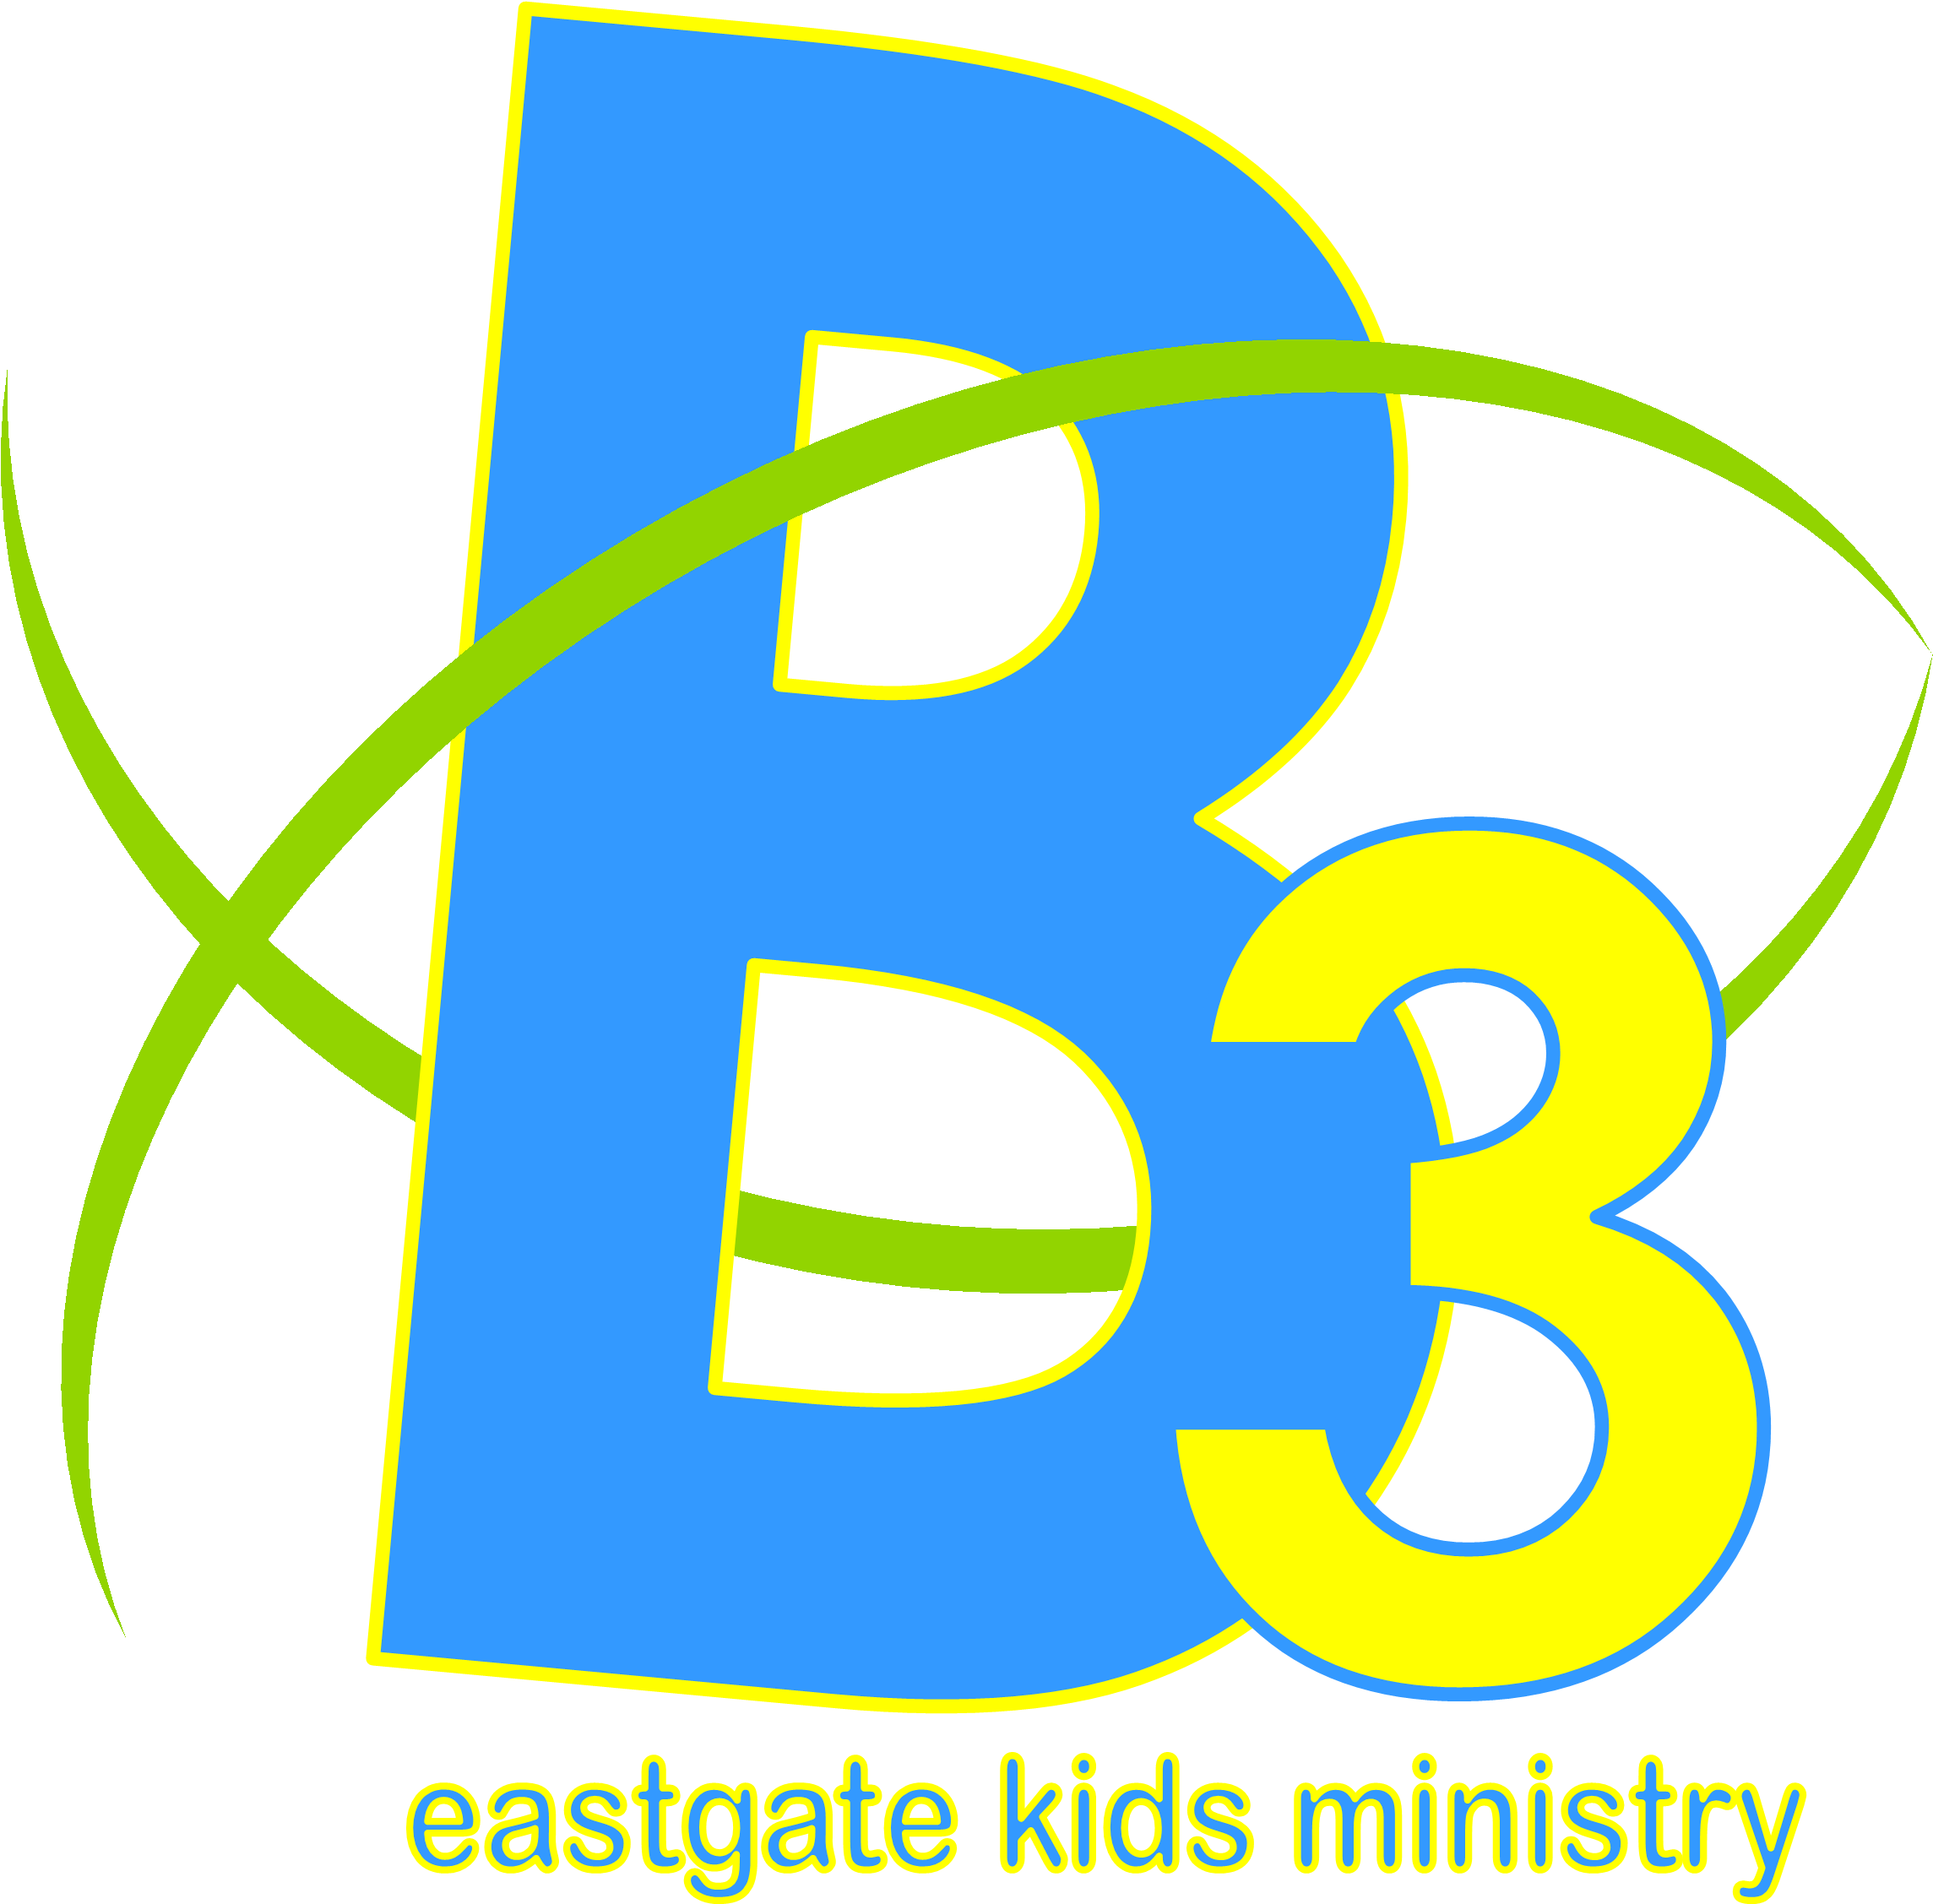 The Mission Of B3 Is To Help Children And Families - Eastgate Baptist Church (2383x2263)